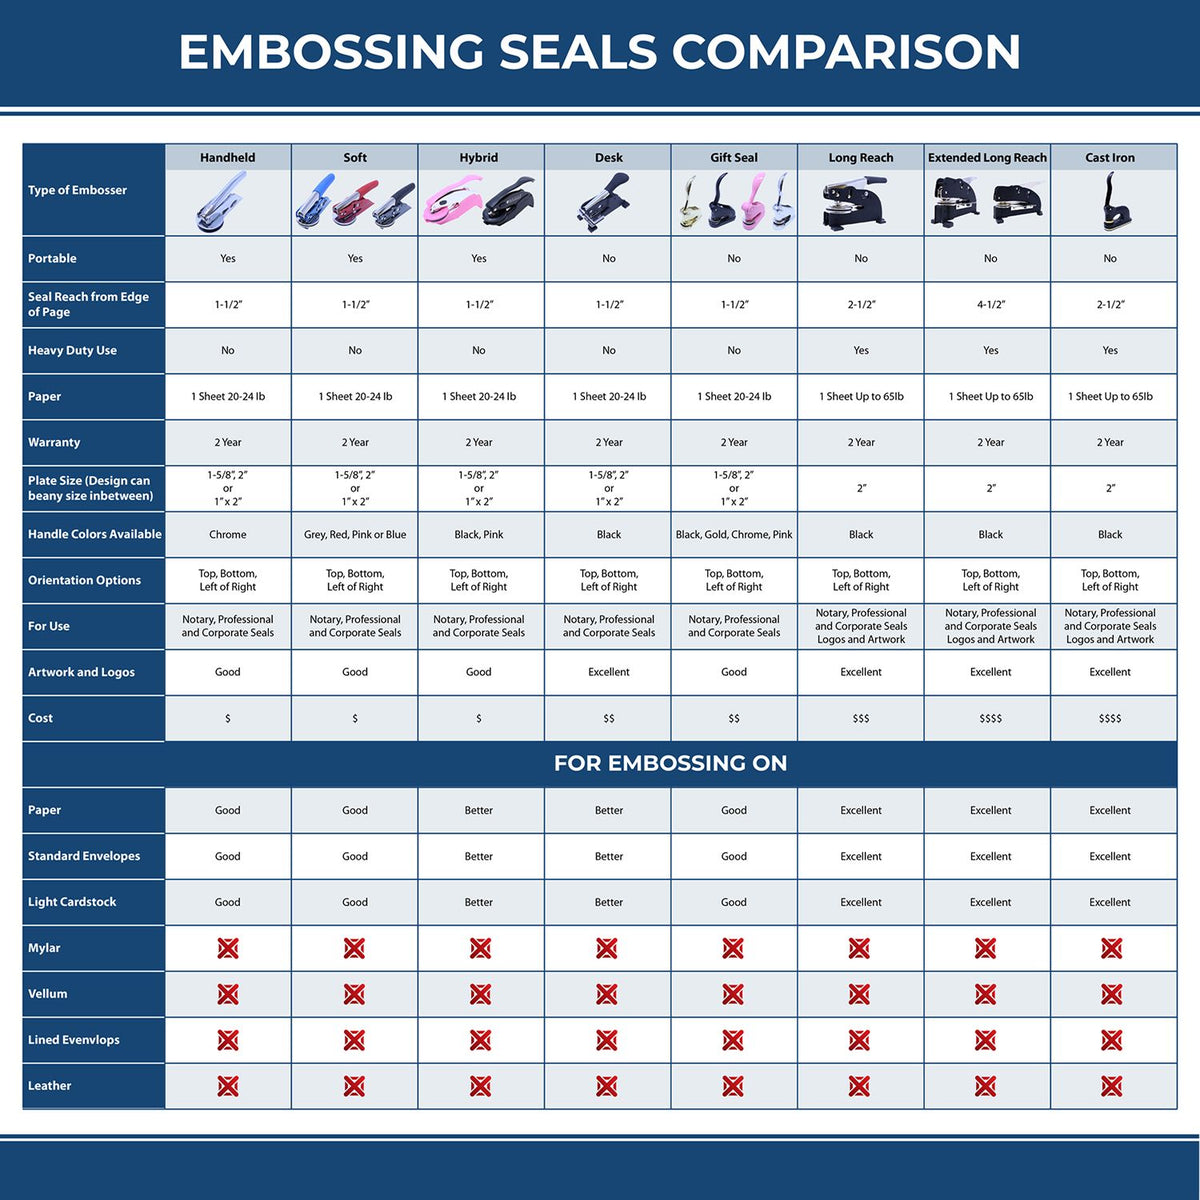 A comparison chart for the different types of mount models available for the Handheld New York Professional Engineer Embosser.